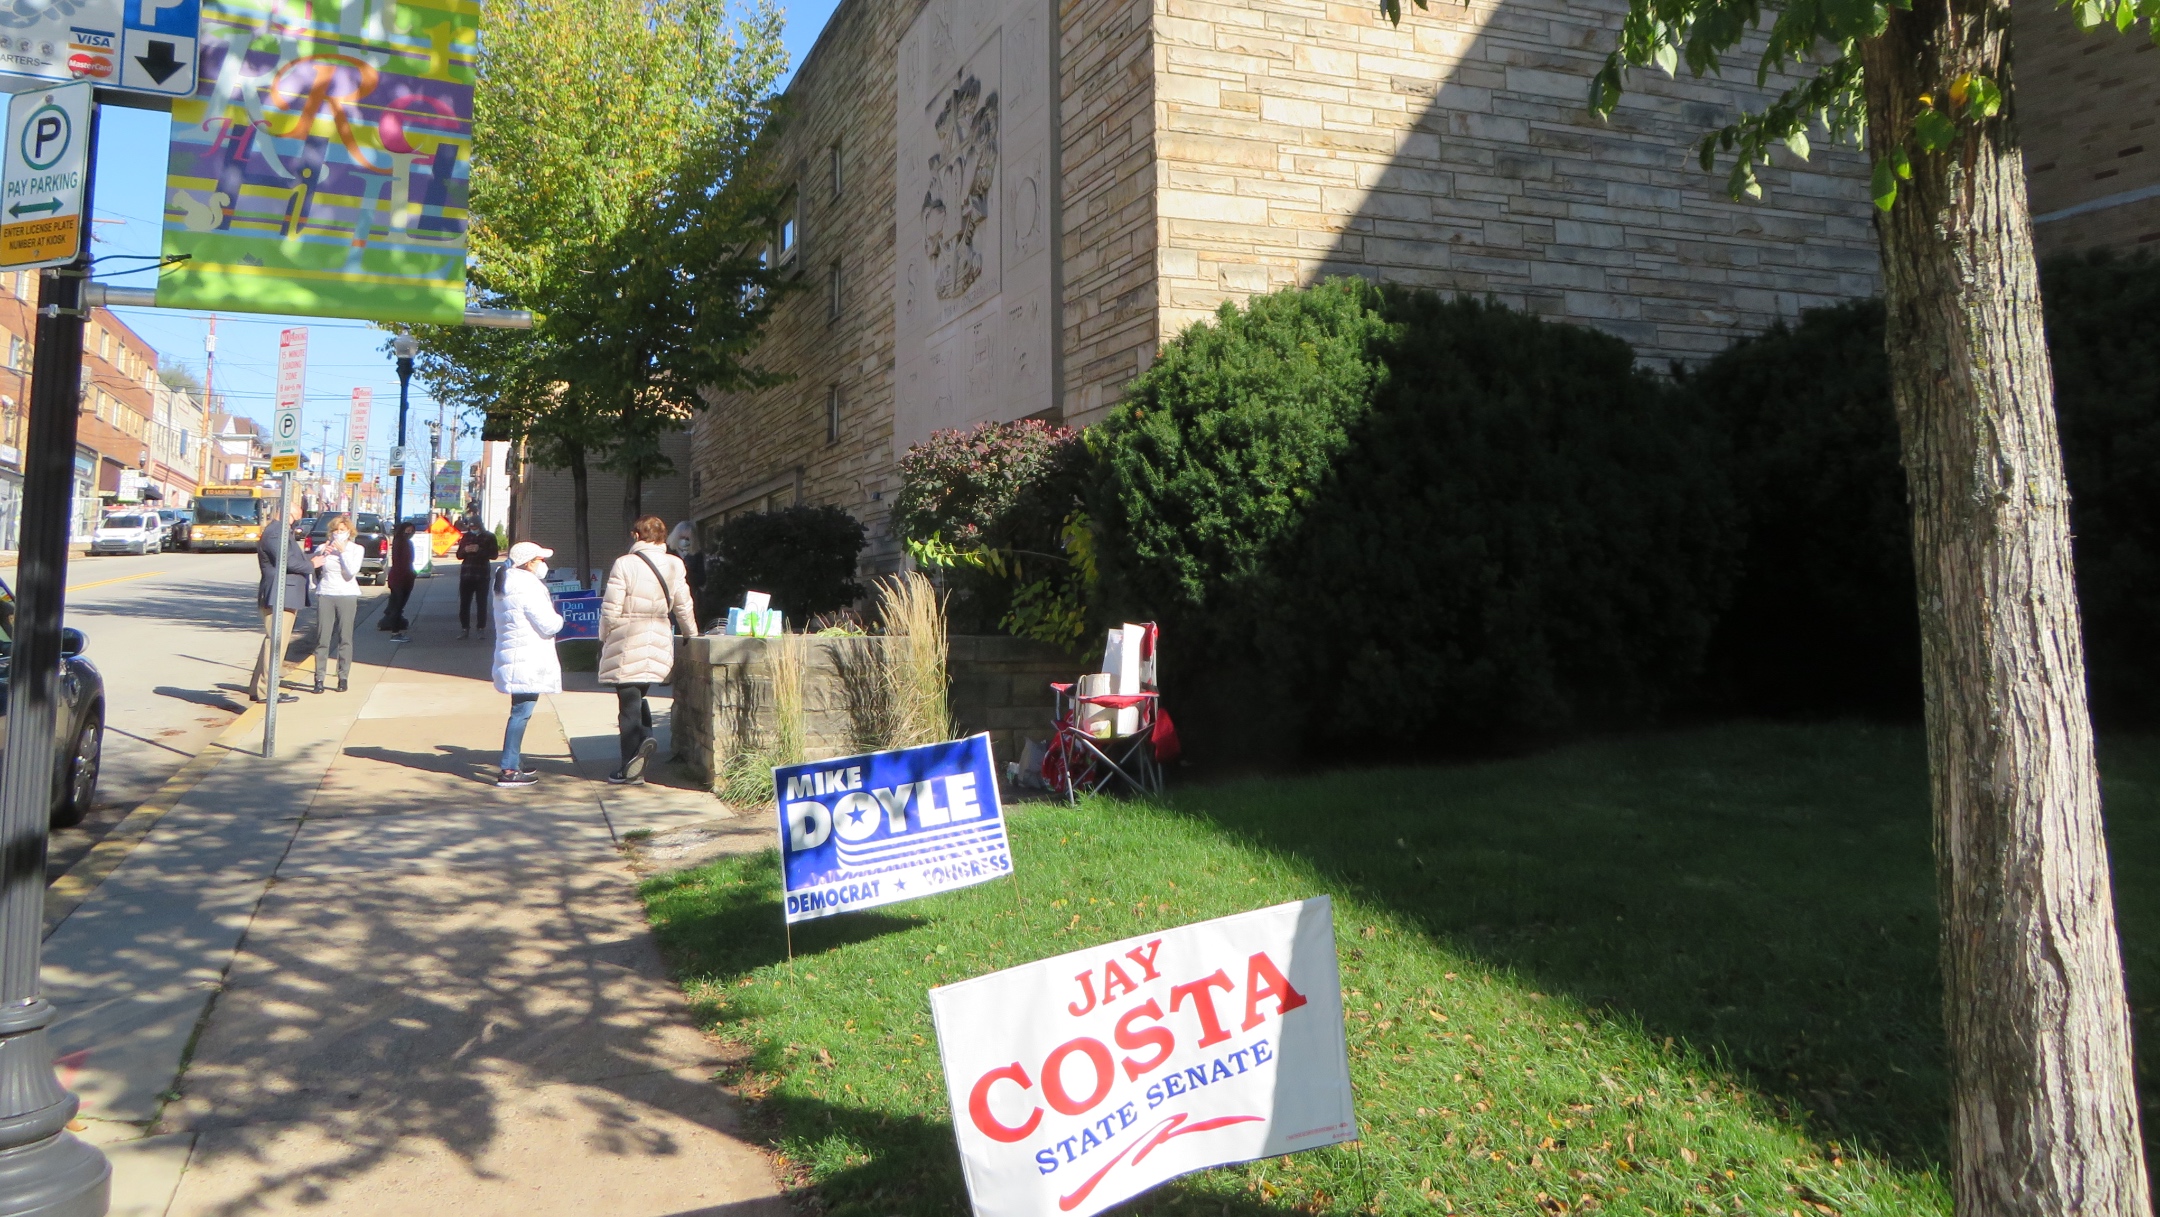 Voters line up outside a voting place in a synagogue Shaare Torah, on Election Day in Pittsburgh, Nov. 3, 2020. (Ron Kampeas)